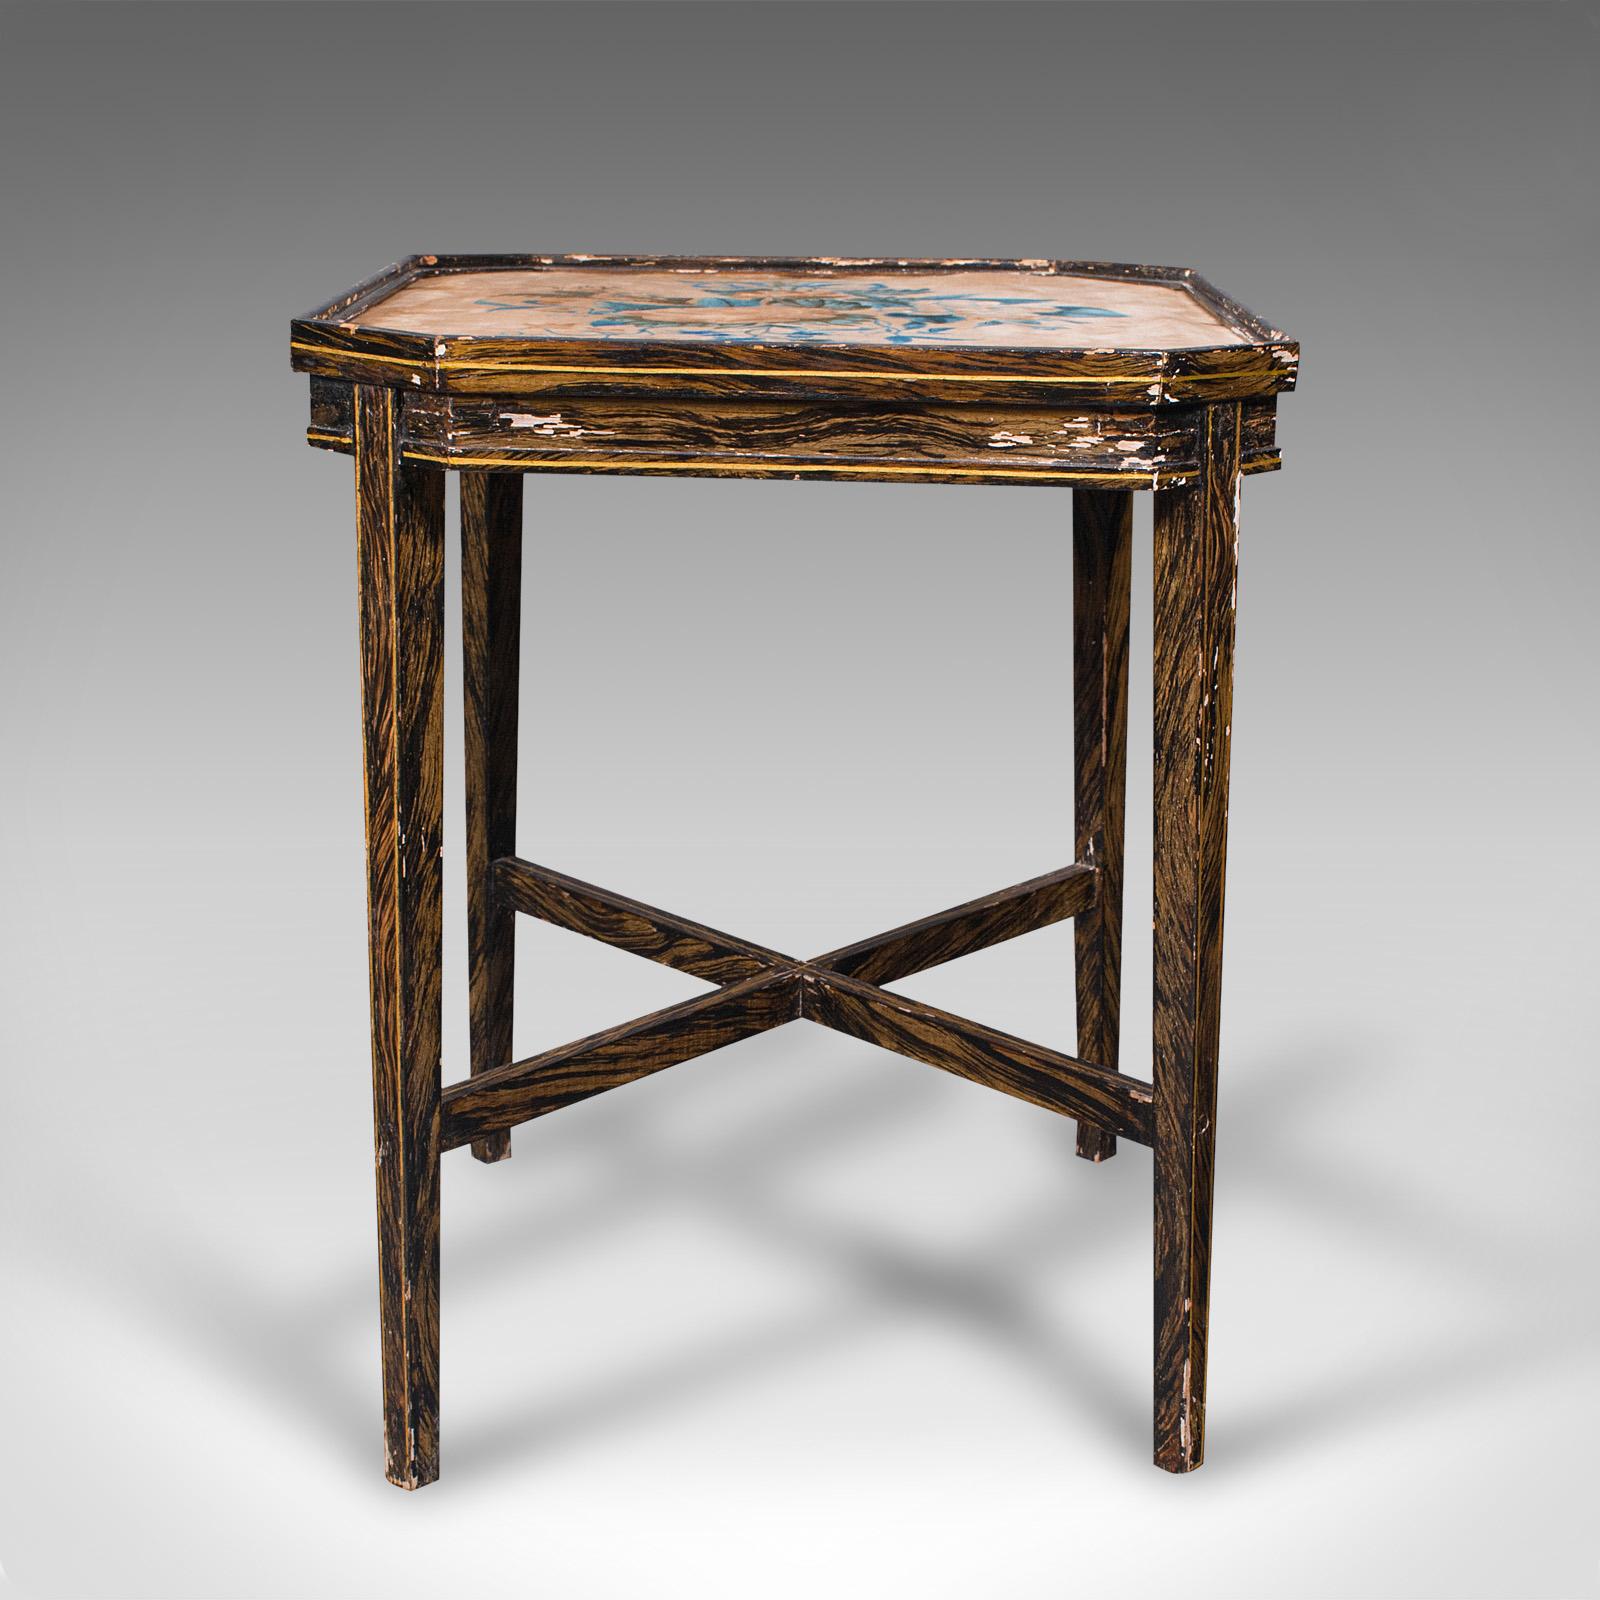 This is an antique tea table. An English, hand-painted beech occasional or side table with velvet top, dating to the Edwardian period, circa 1910.

Distinctively hand-painted with fascinating form
Displays a desirable aged patina with light wear